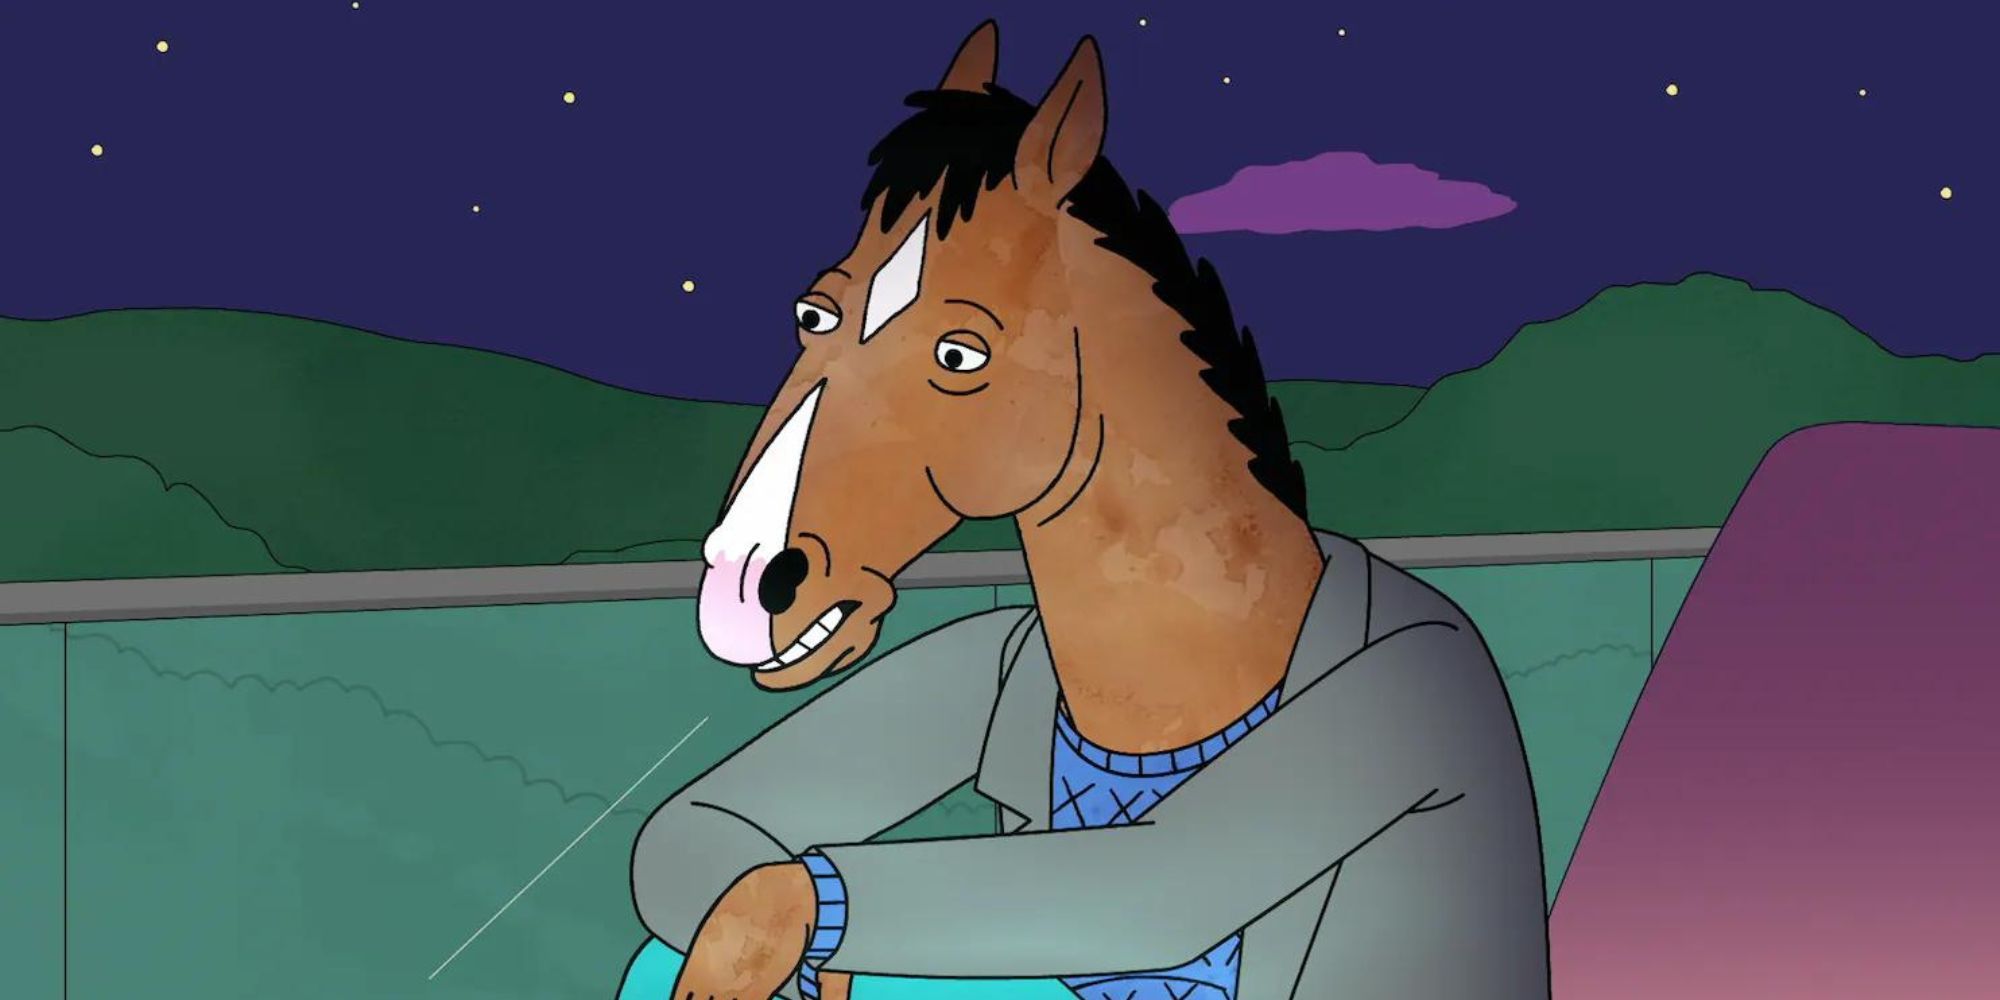 Bojack from Bojack Horseman sitting on his couch looking sad.